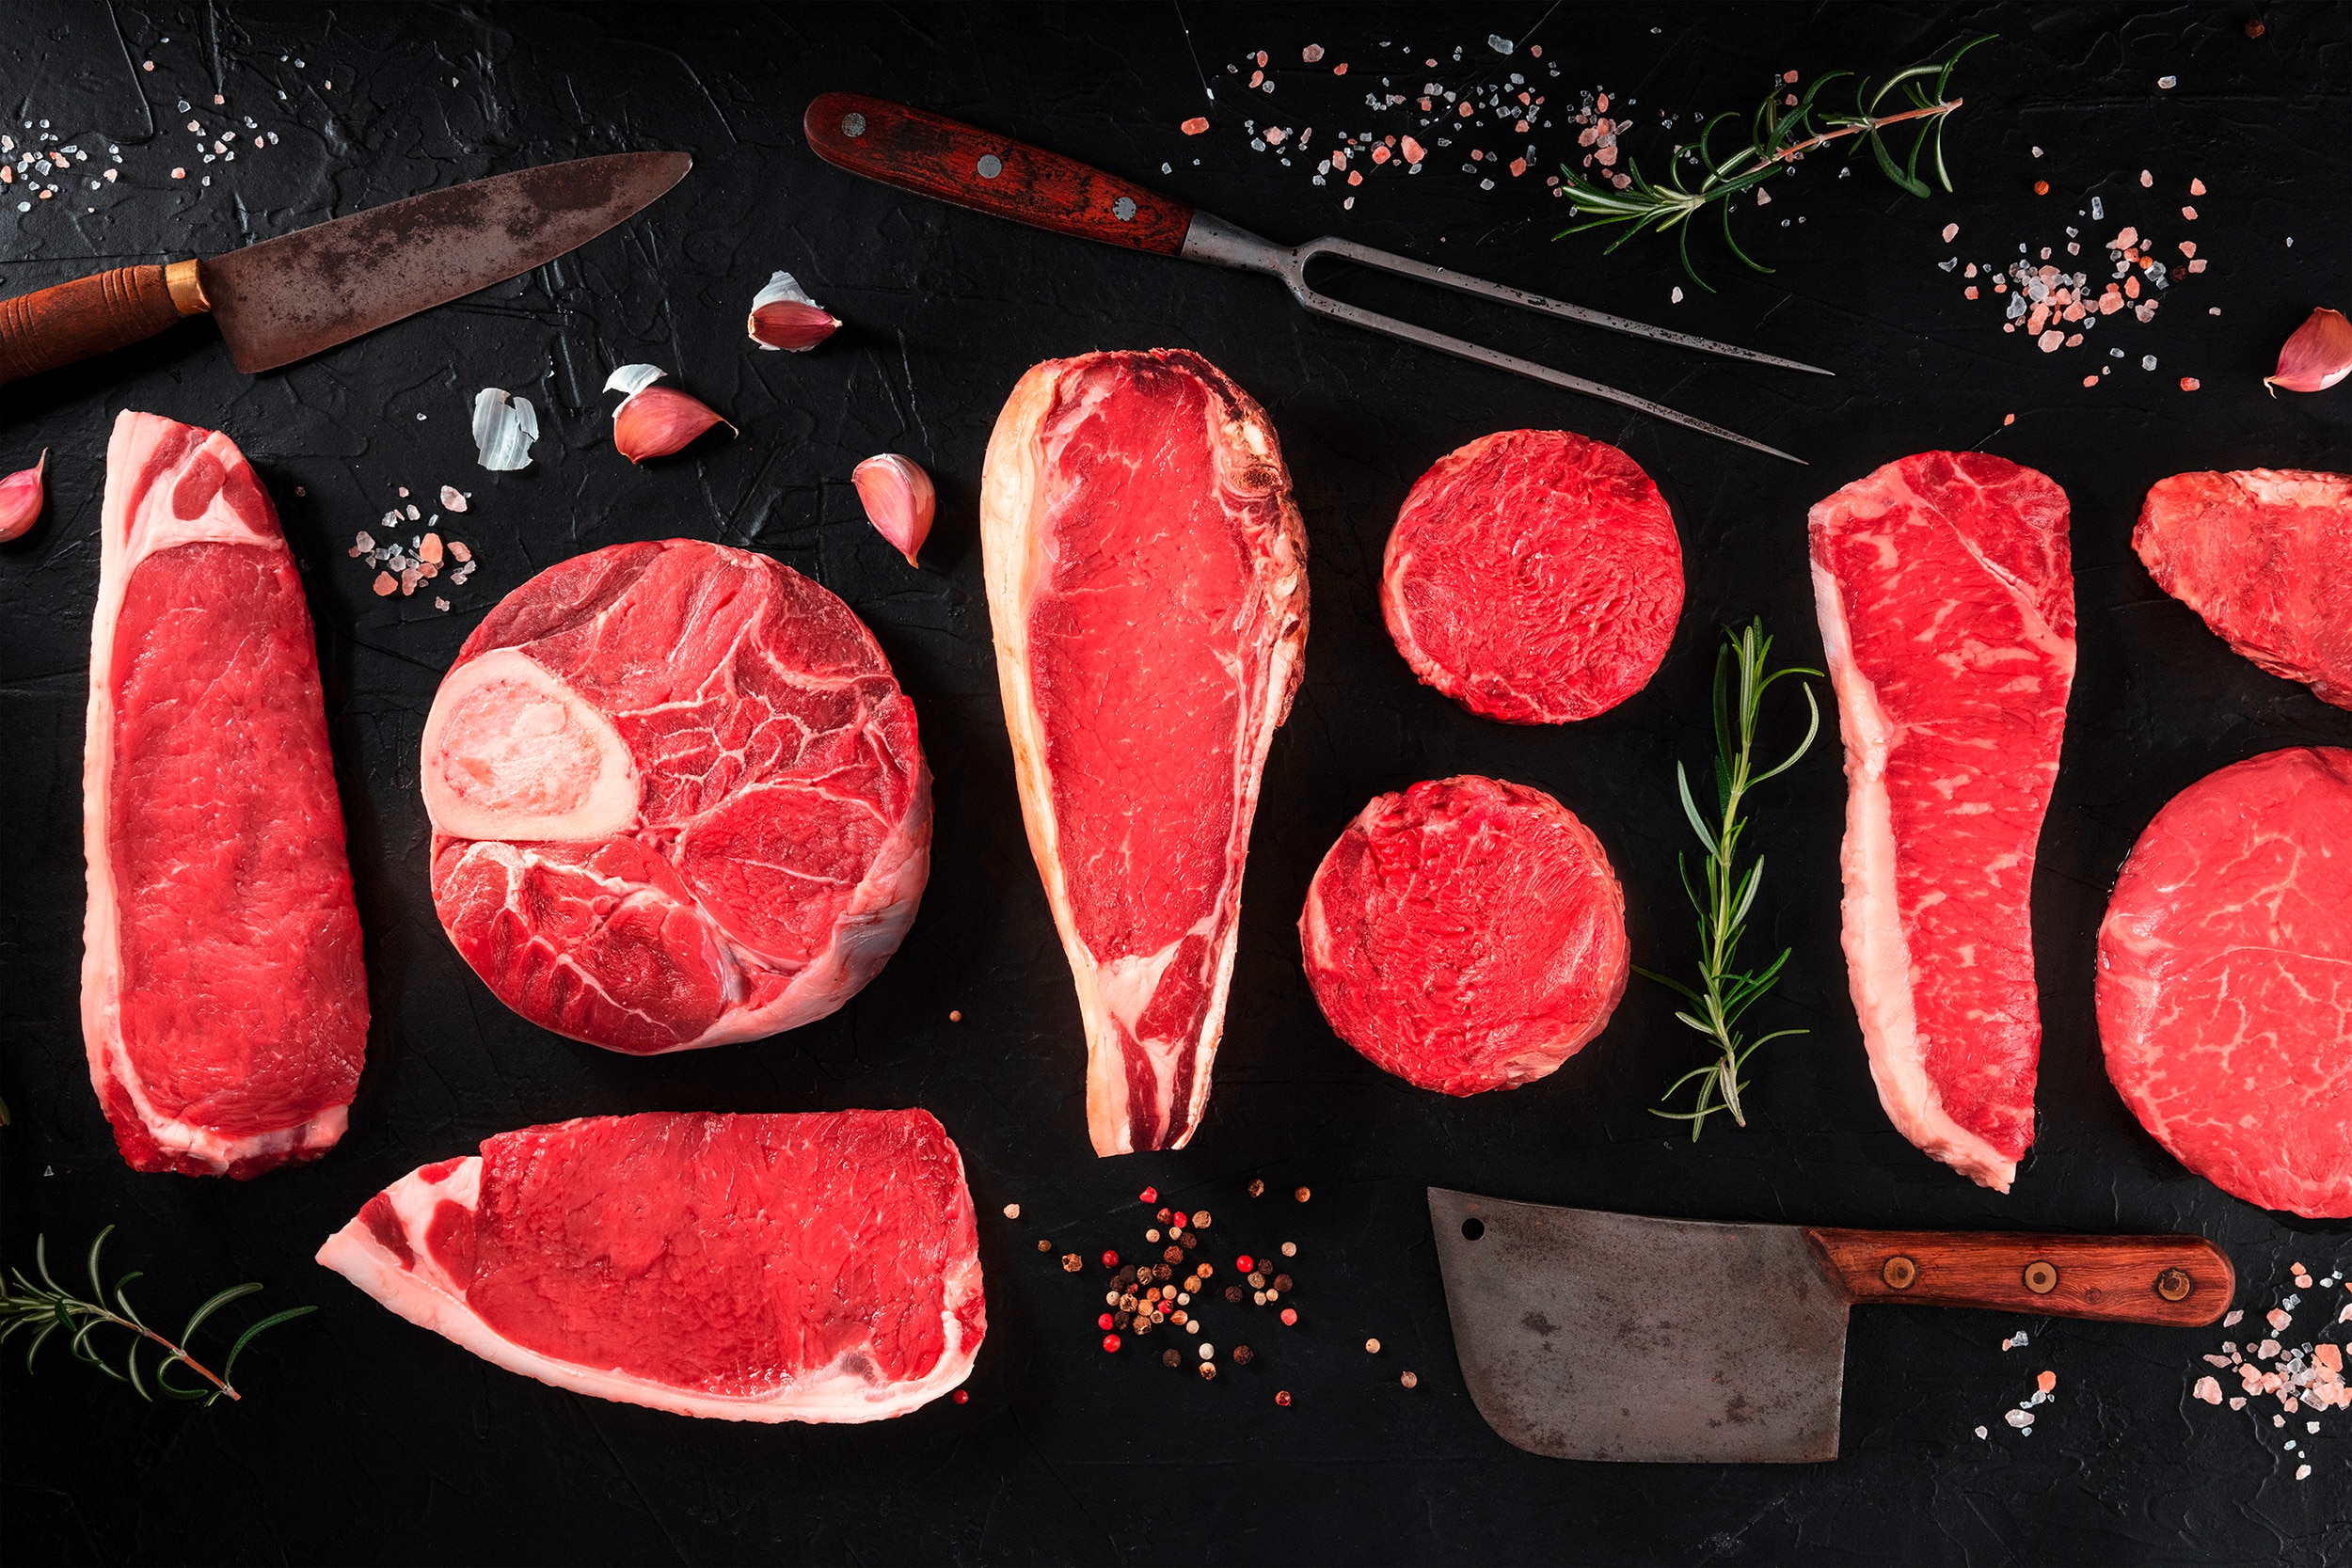 Several cuts of beef on a black countertop surrounded by different knives